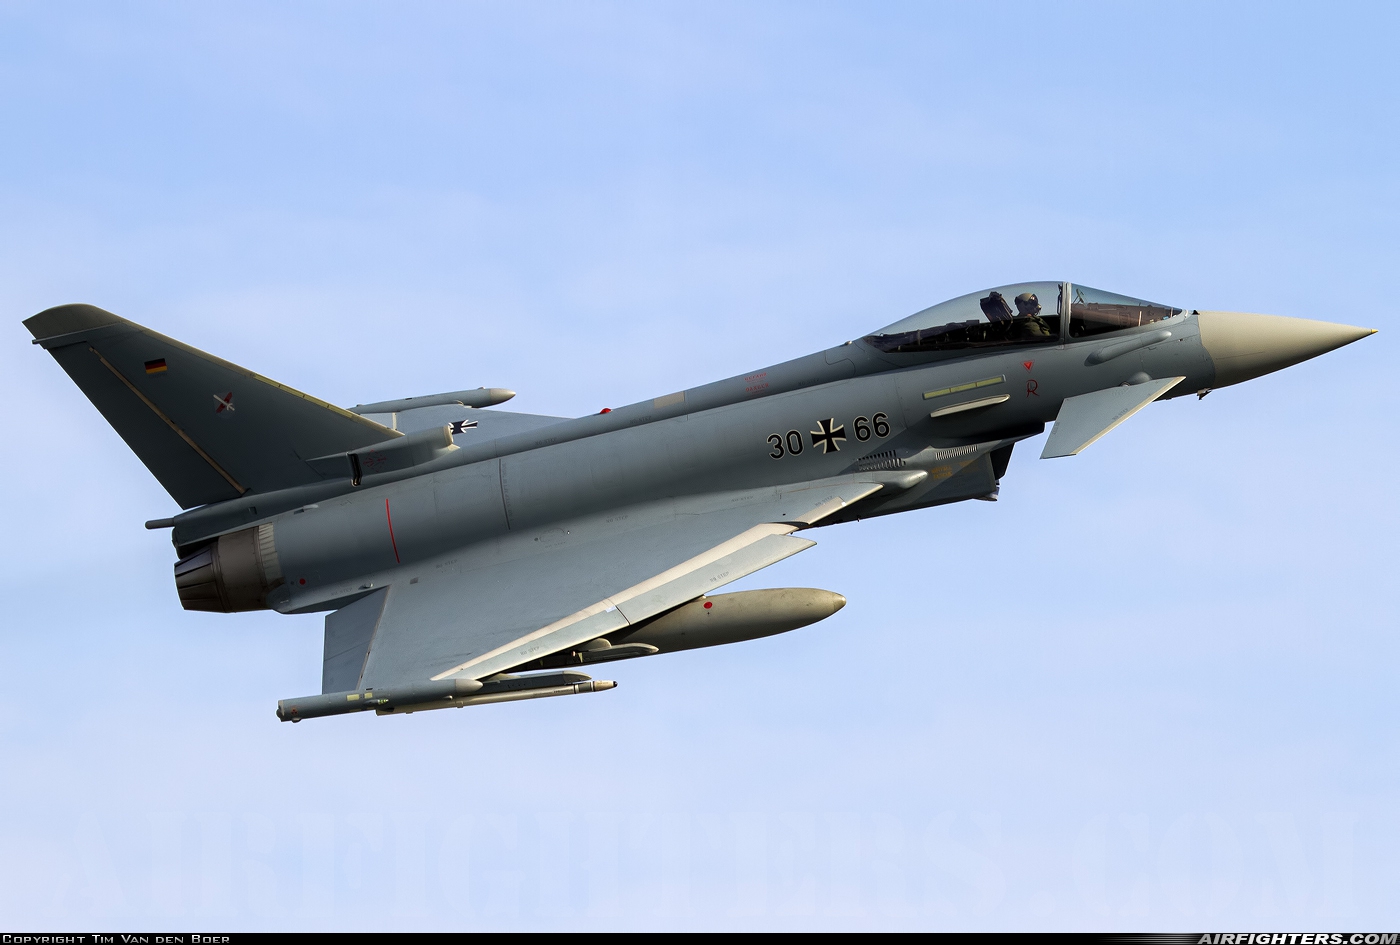 Germany - Air Force Eurofighter EF-2000 Typhoon S 30+66 at Wittmundhafen (Wittmund) (ETNT), Germany